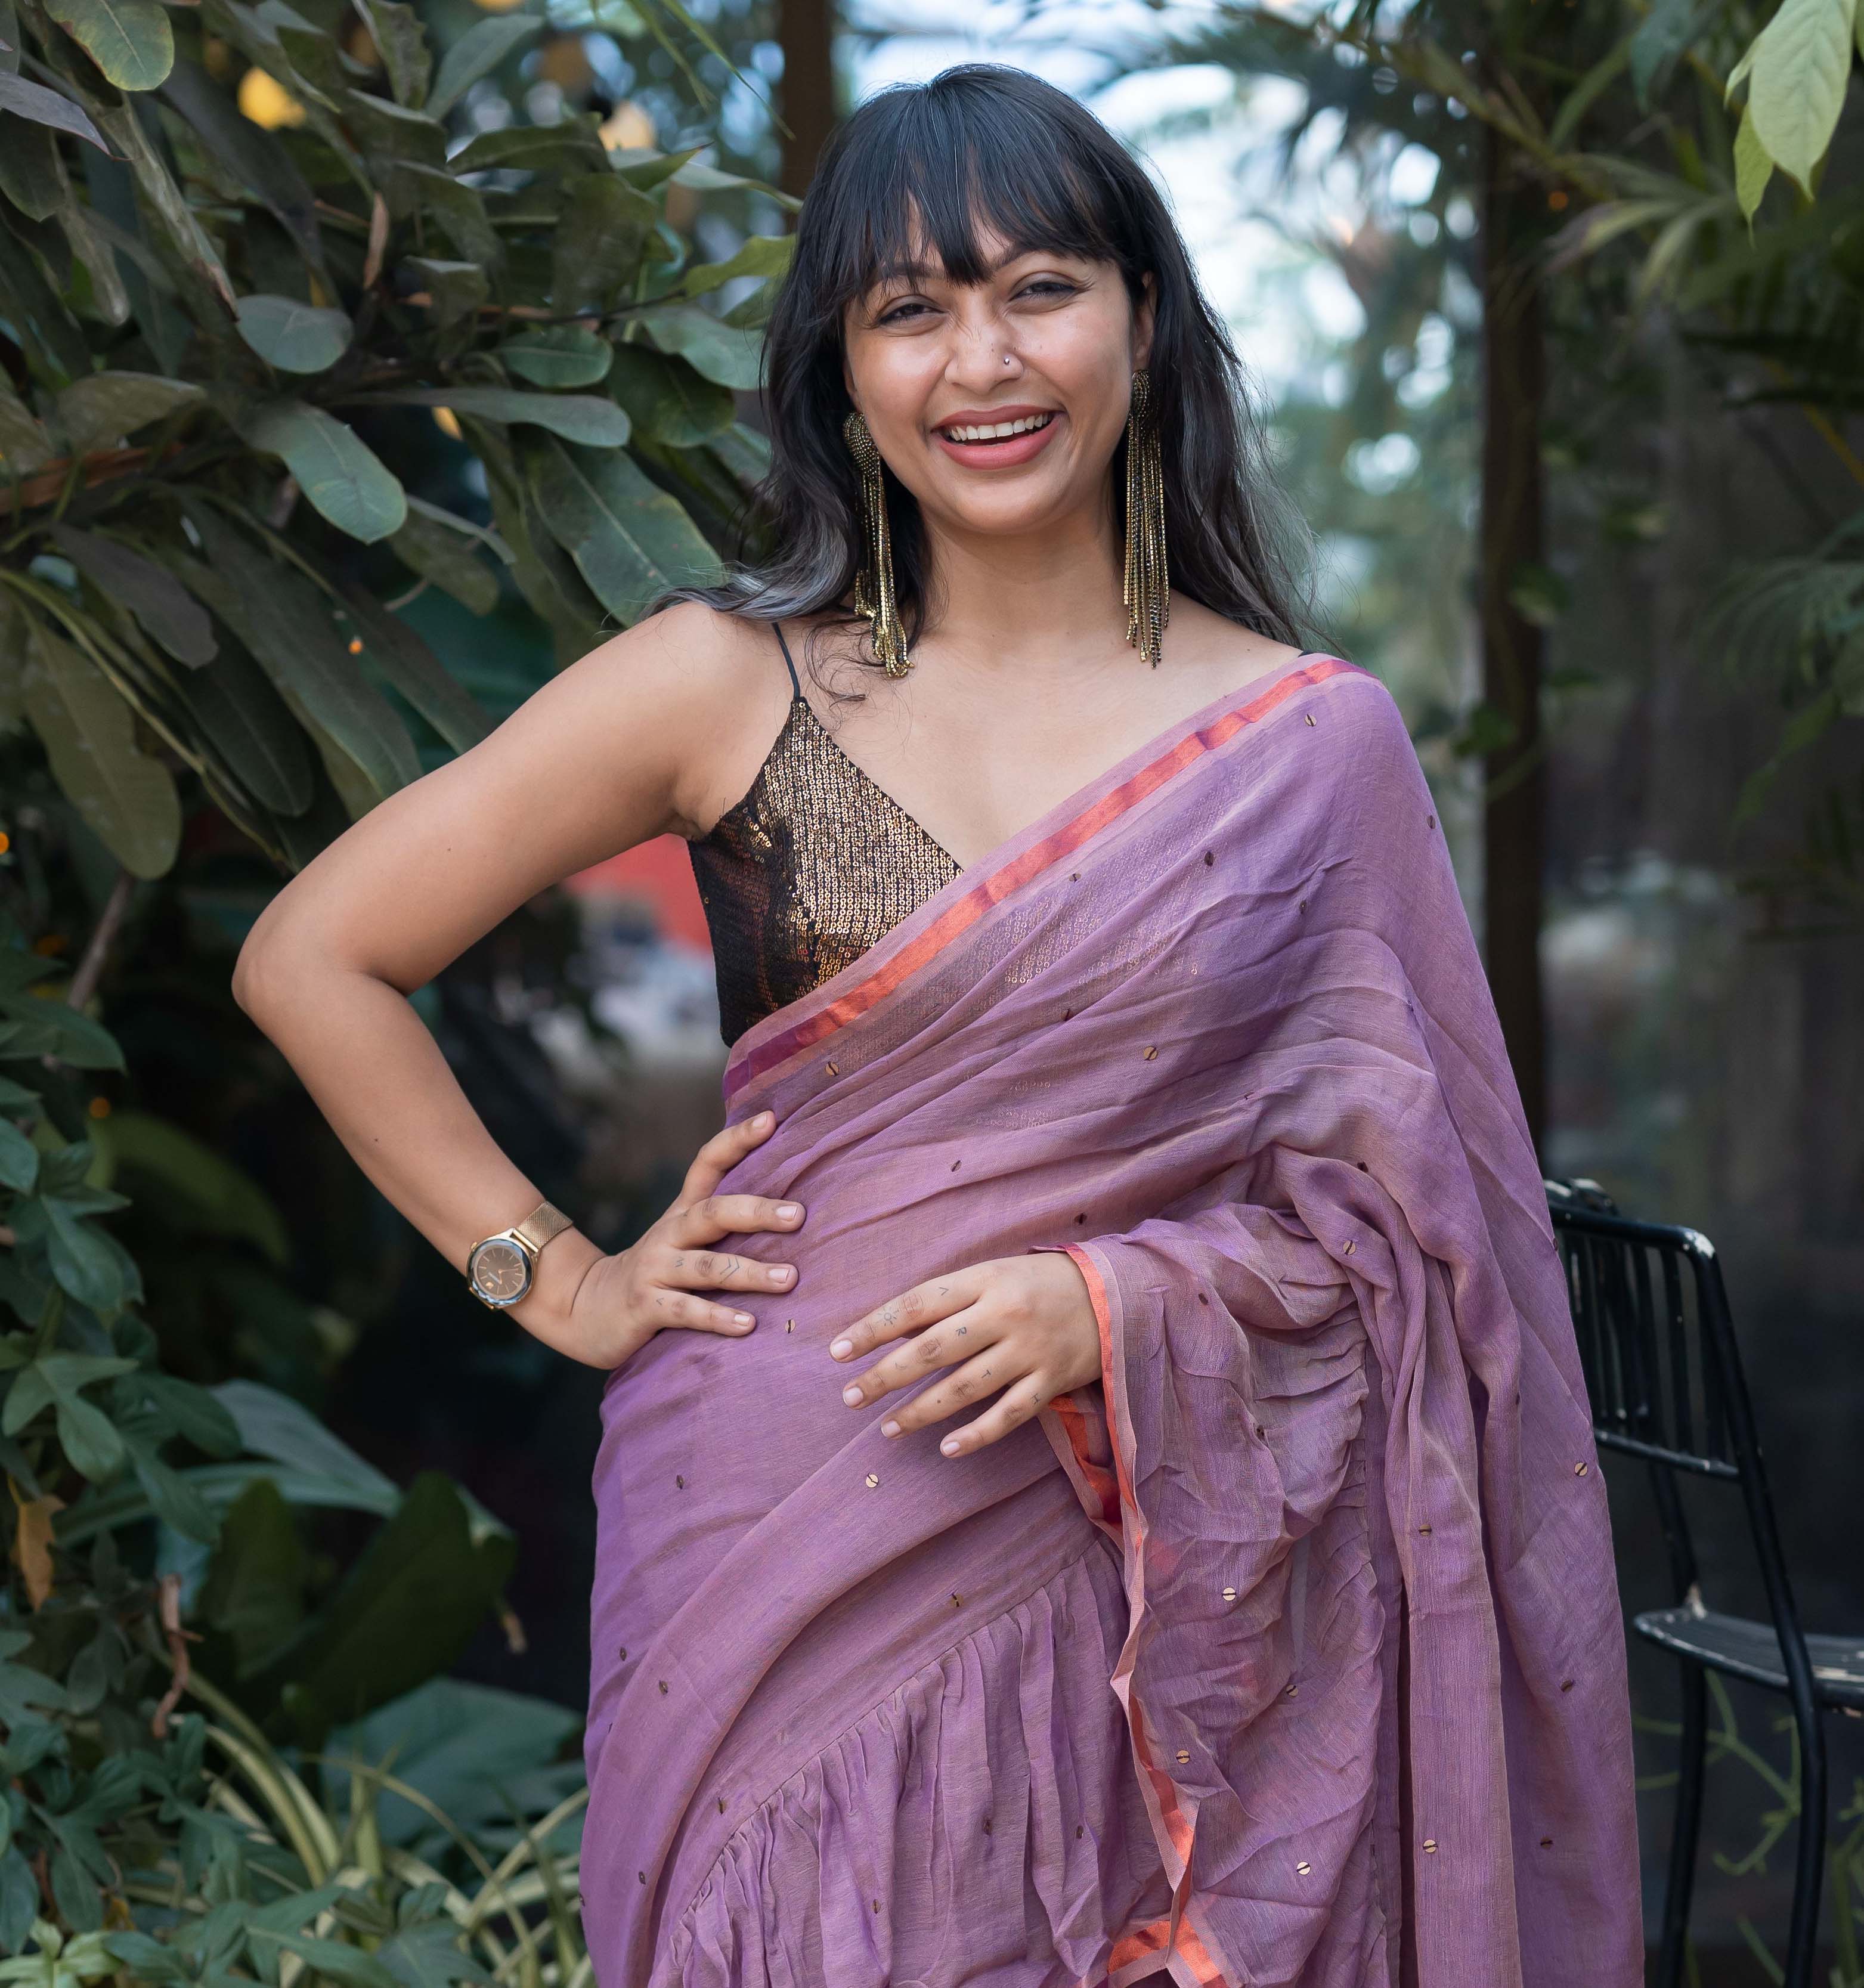 Can we wear shapewear under a saree? - Quora